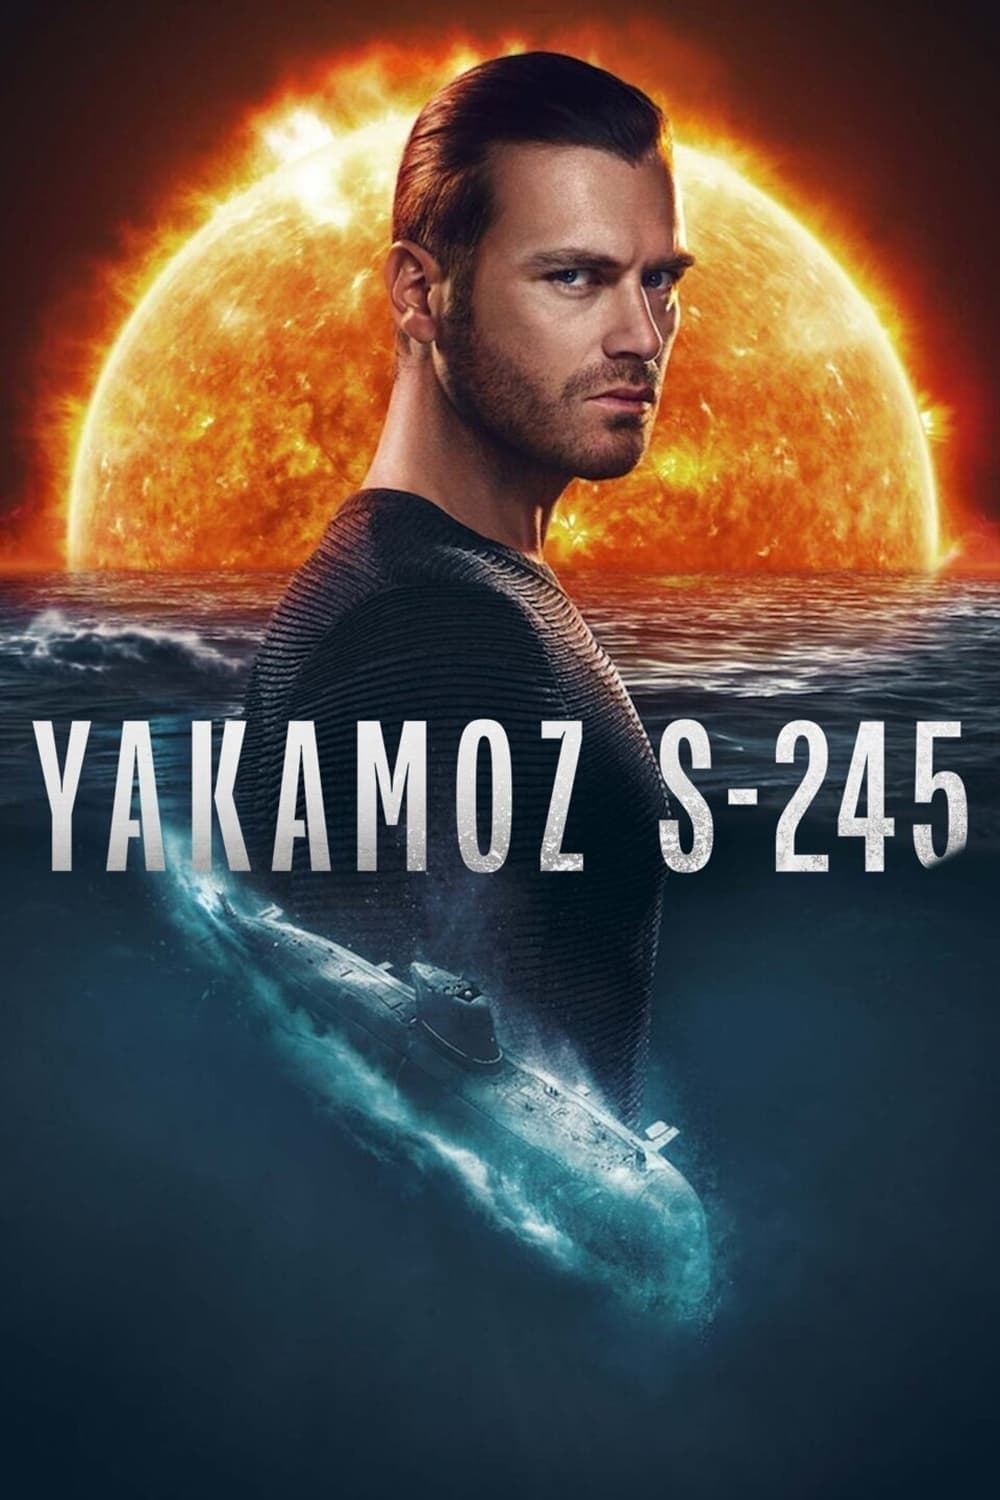 Yakamoz S-245 TV Shows About Apocalypse